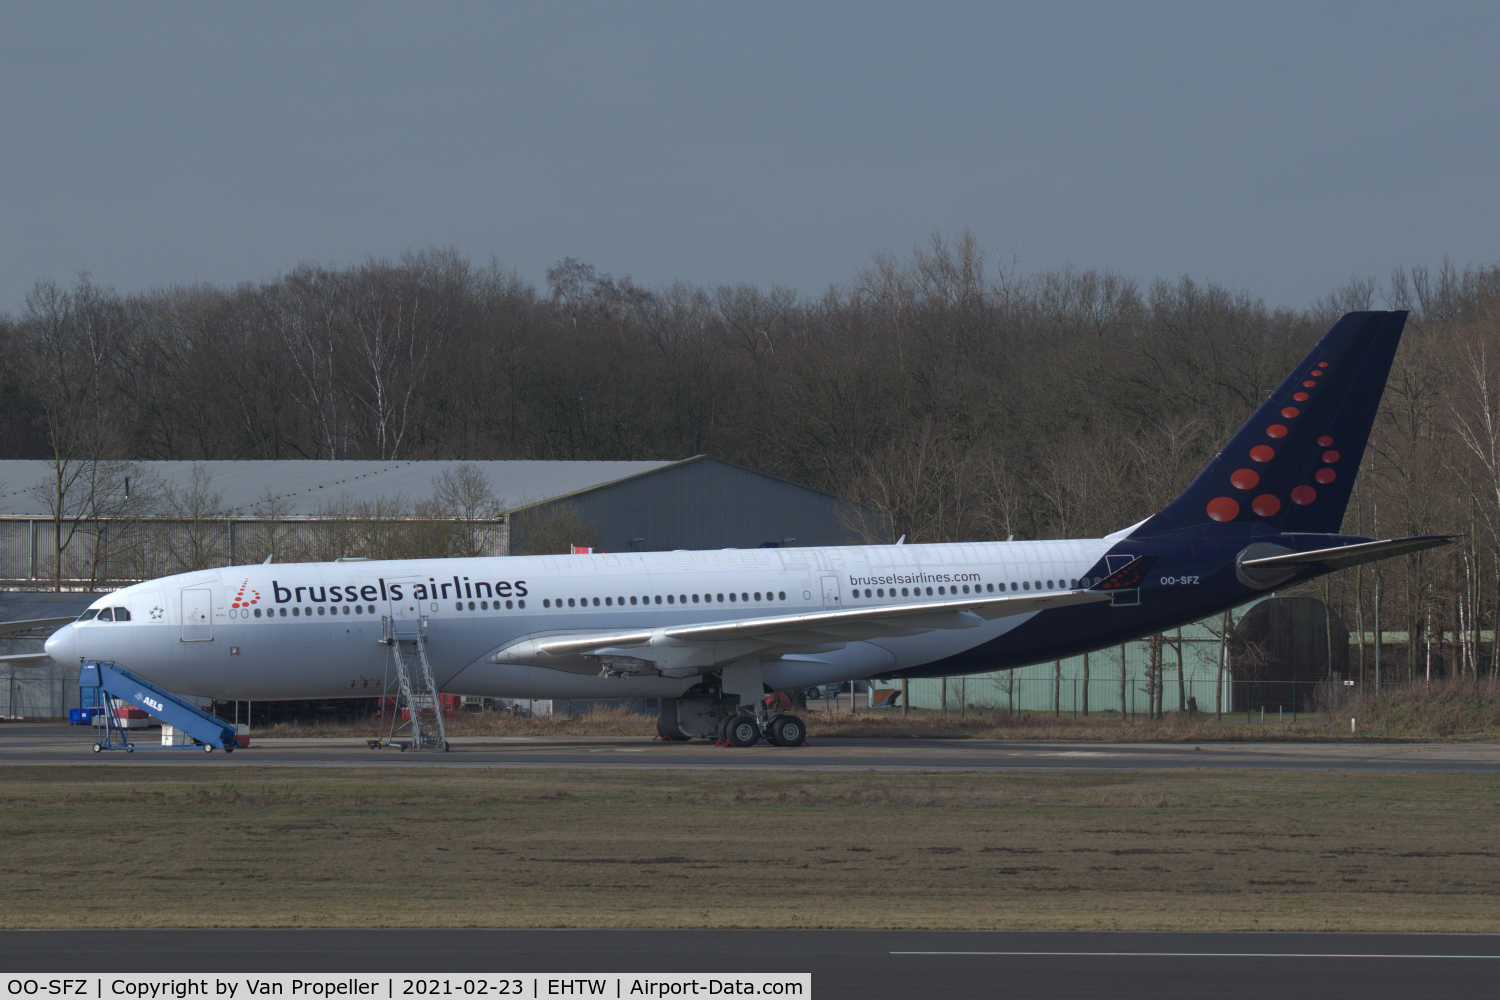 OO-SFZ, 1998 Airbus A330-223 C/N 249, Brussels Airlines Airbus A330-223 at Twente Airport, the Netherlands, for dismantling by Aircraft End-of-Life Solutions